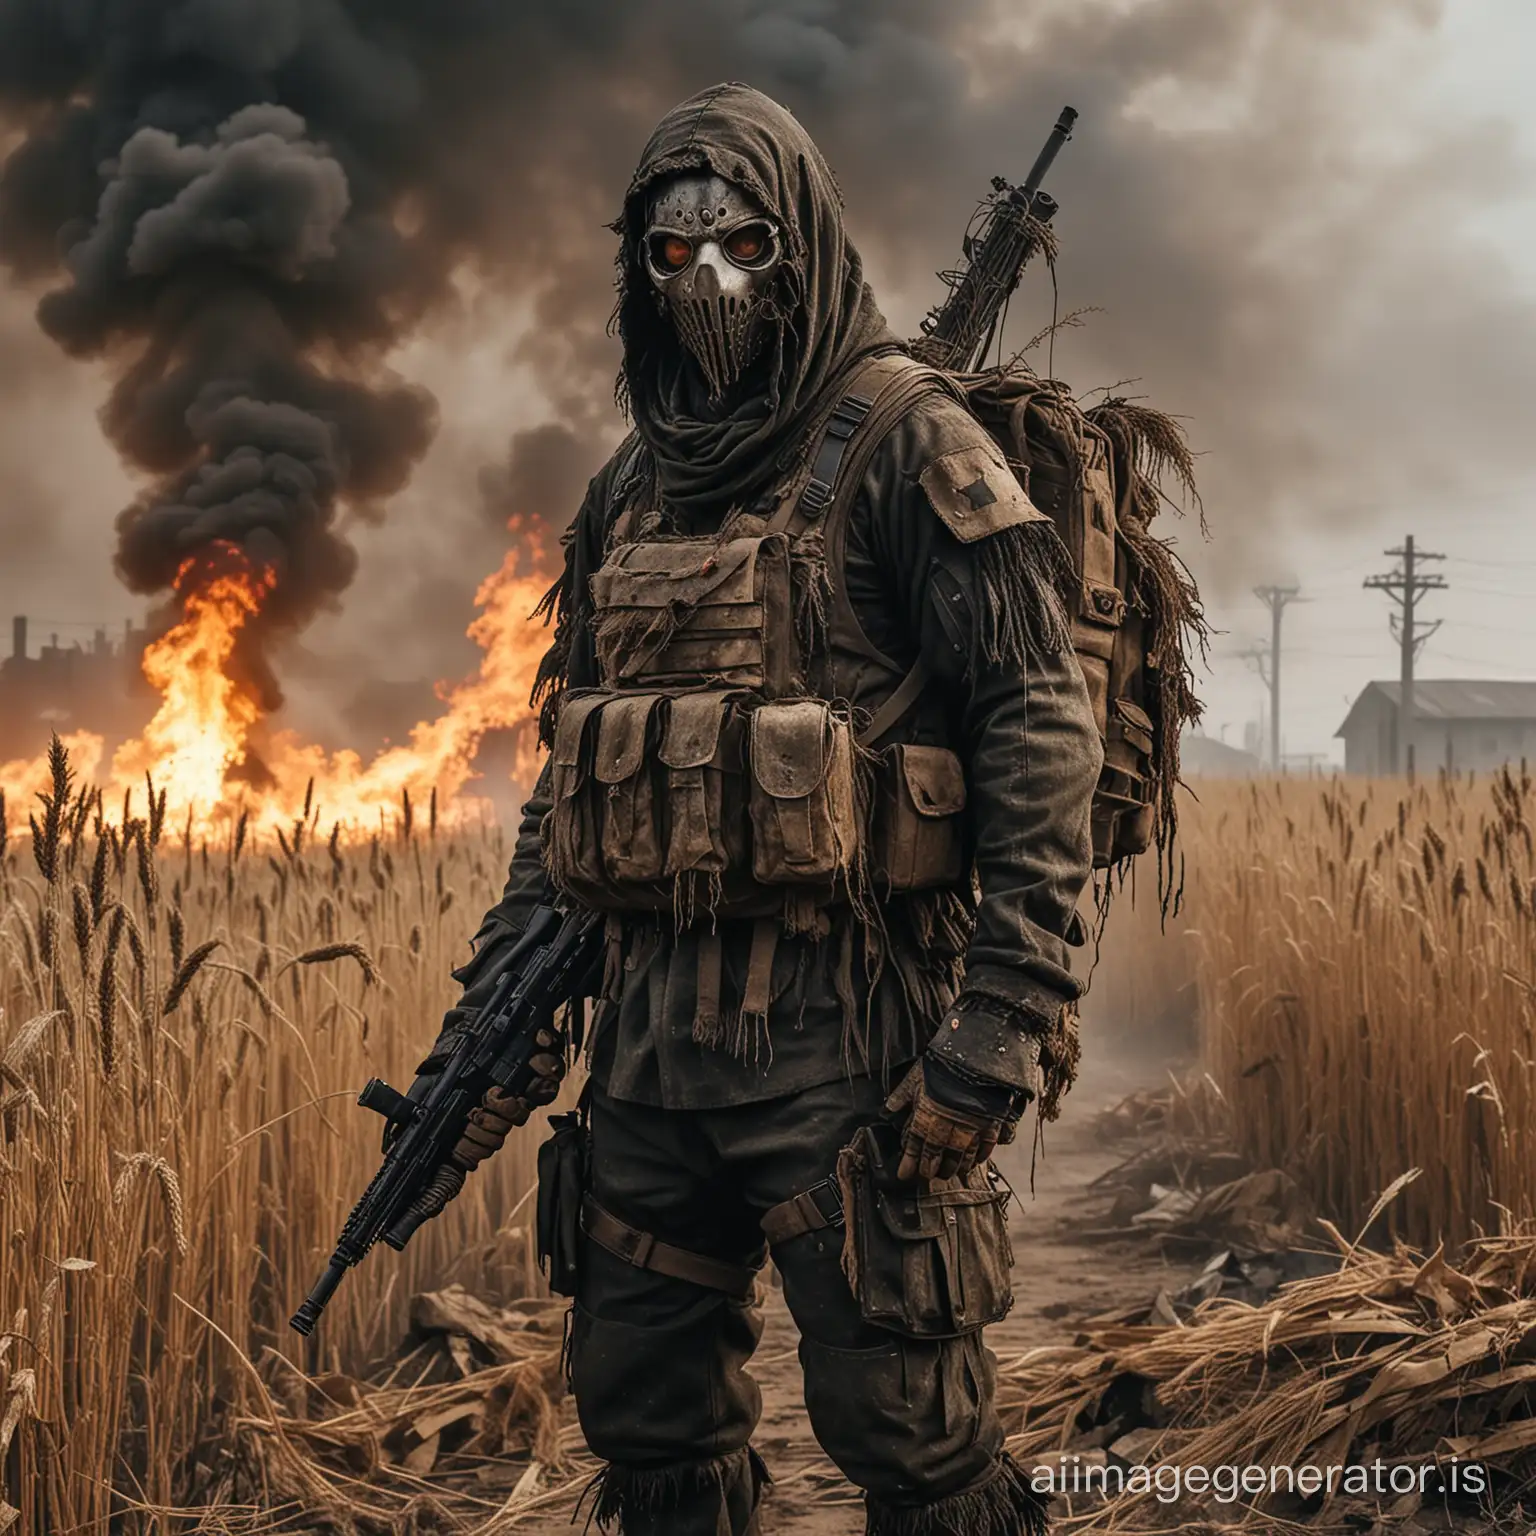 Sinister-Scarecrow-Soldier-Stands-Amid-PostApocalyptic-Wheat-Wasteland